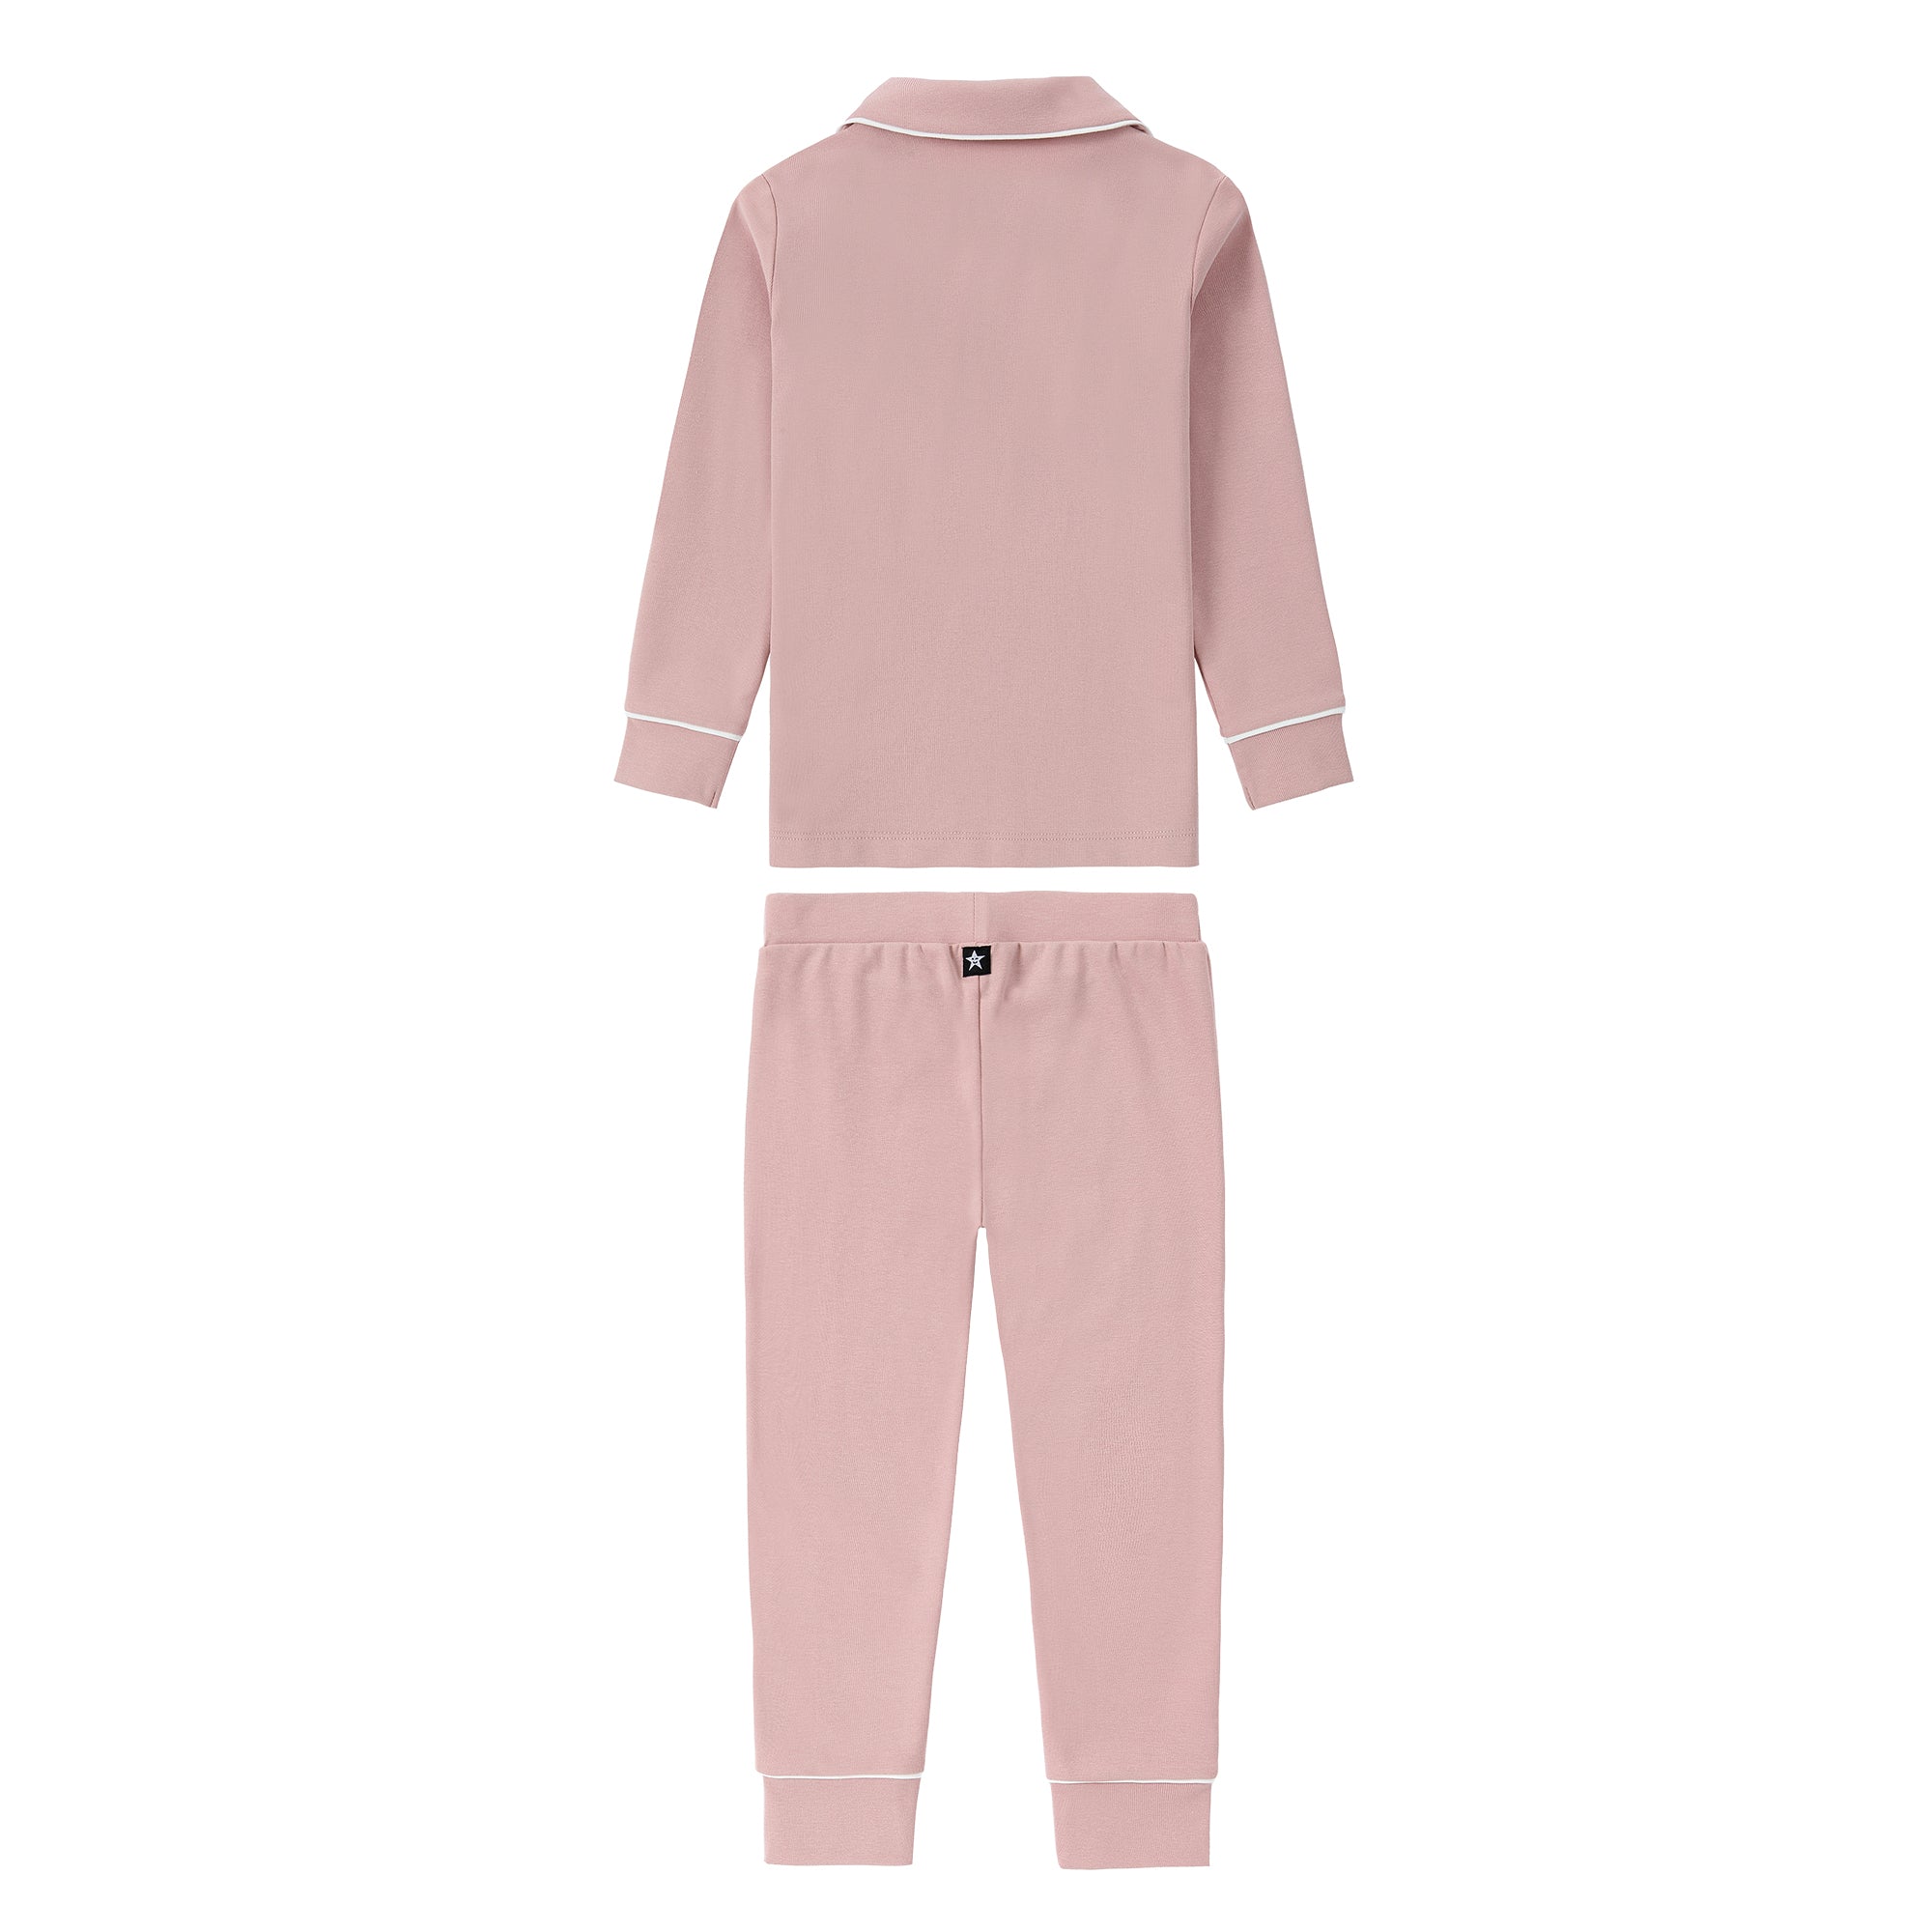 Light Pink Collar Pajama With White Accents